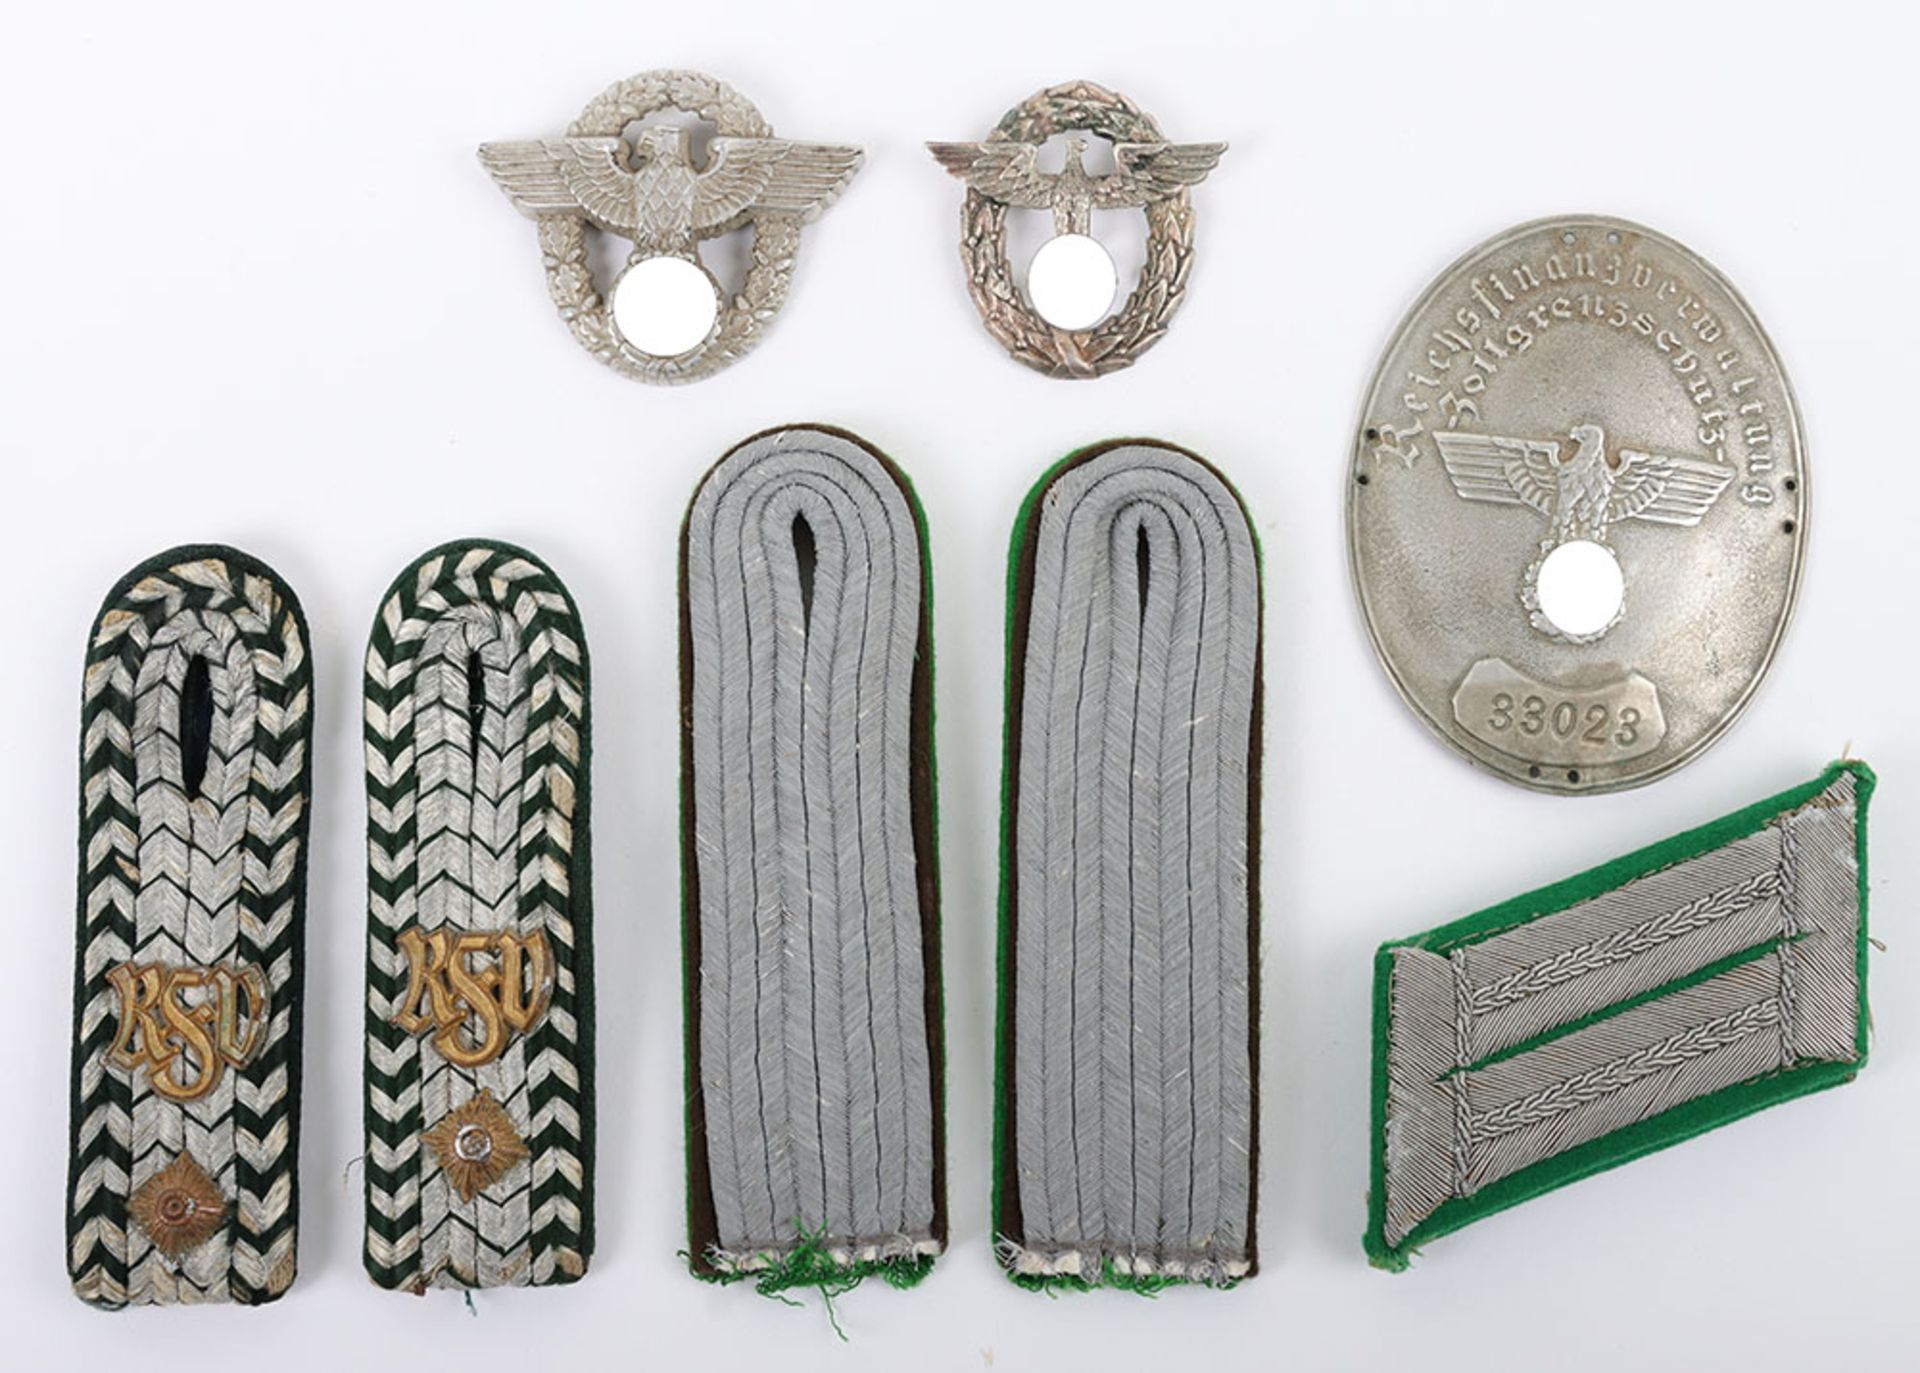 WW2 German Police Badges and Insignia